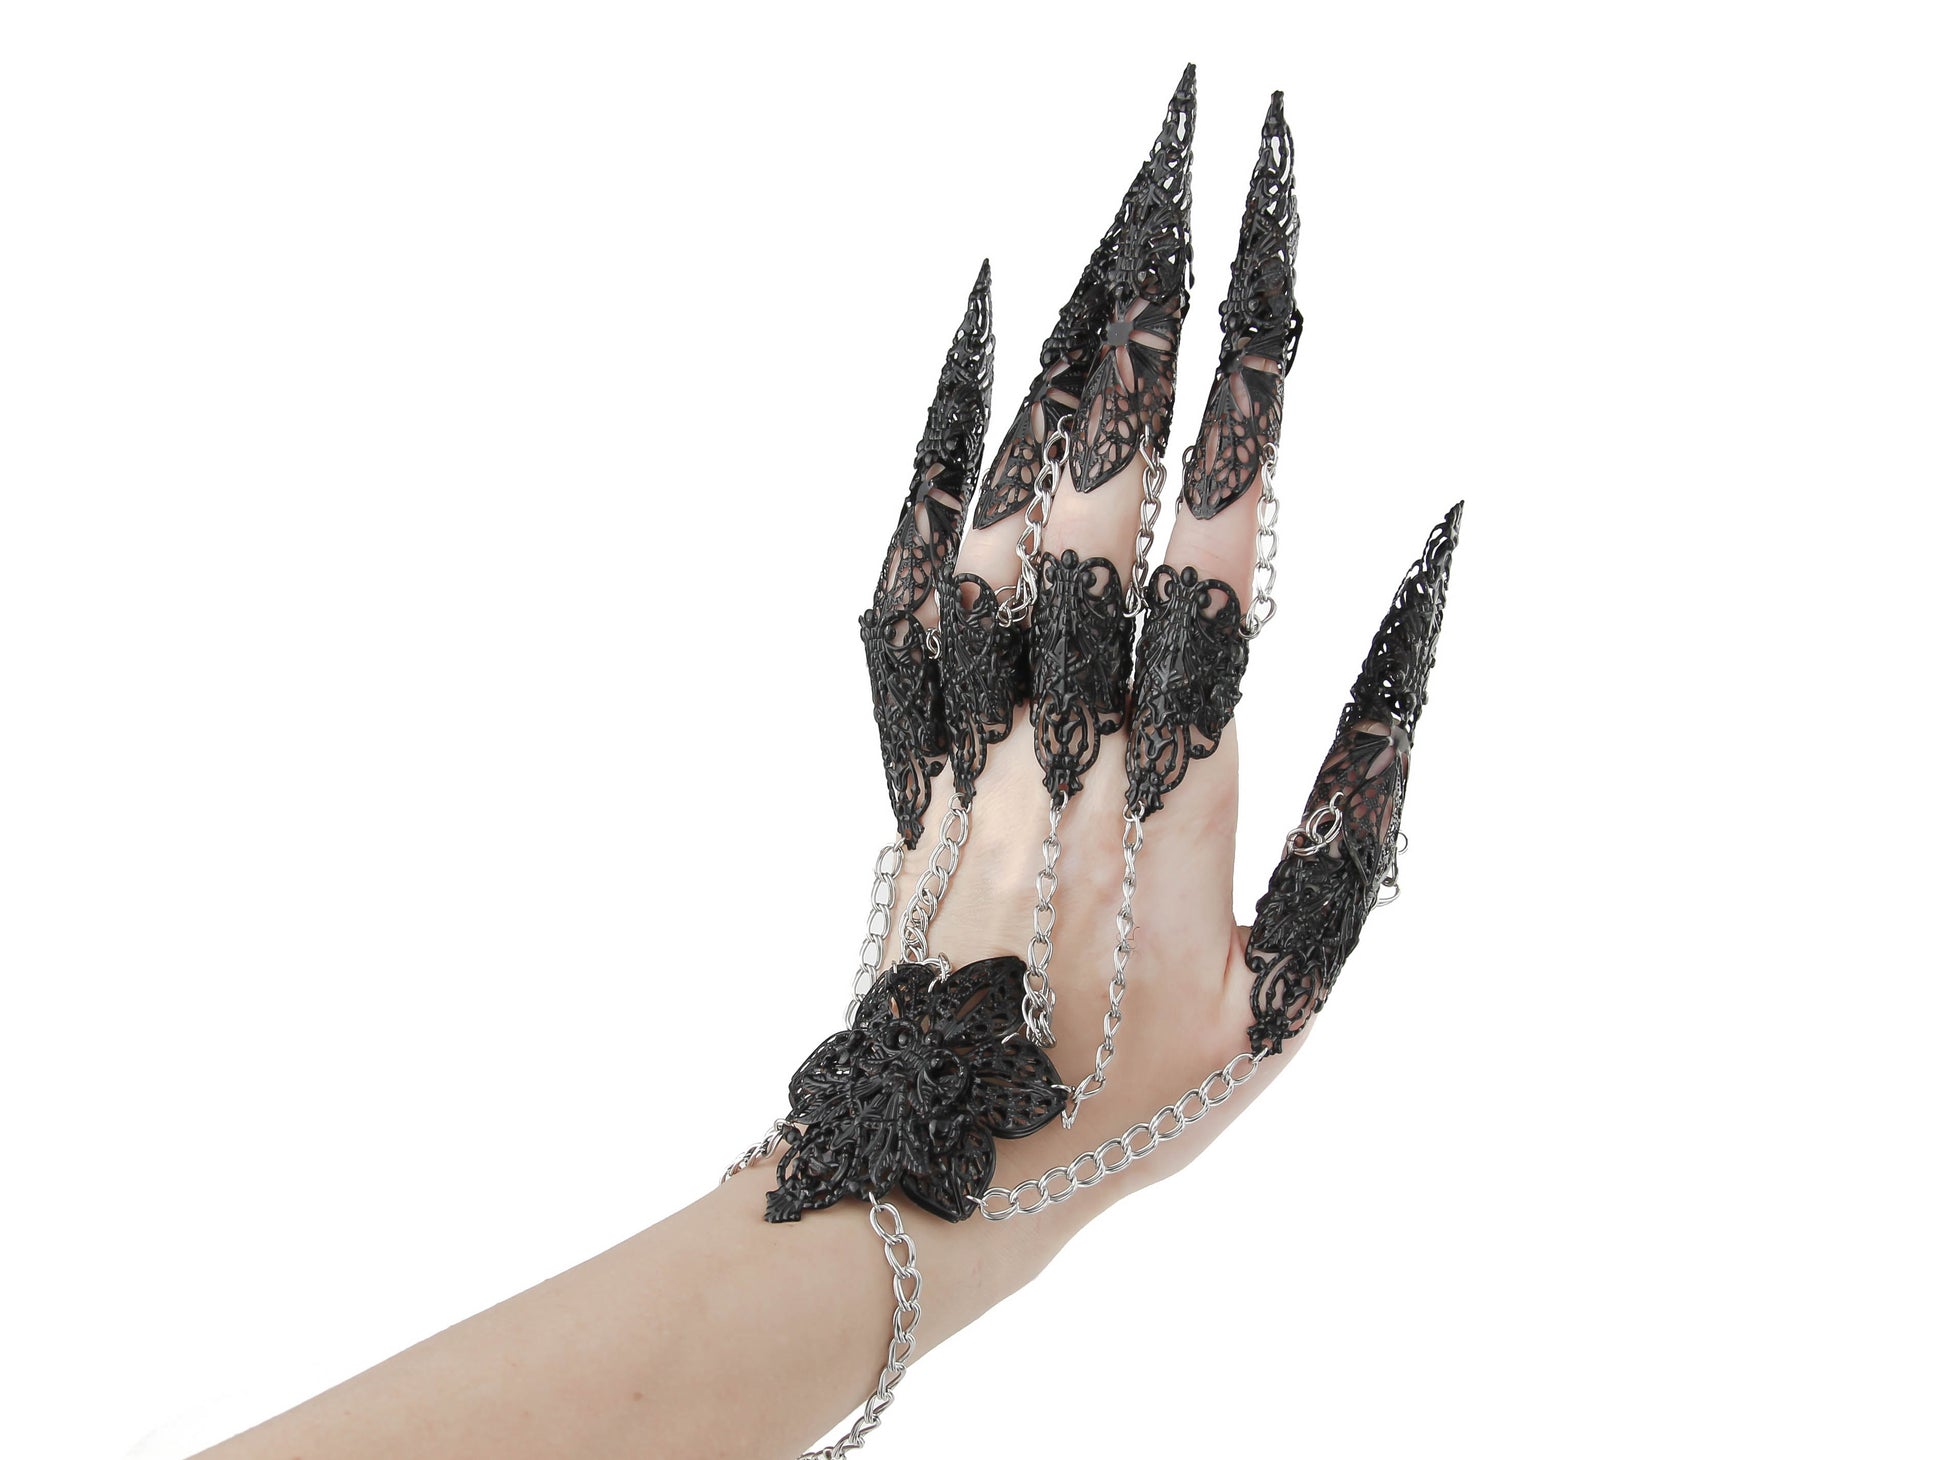 Delve into the realm of Myril Jewels with these exquisite full-hand armored claw rings, intricately designed for the dark avant-garde enthusiast. Perfect for a gothic, alternative look, these rings are ideal for Halloween, embodying Neo Gothic sophistication and punk attitude. They're a dramatic choice for Gothic Lolita, Gothic-chic, whimsigoth, or witchcore aesthetics, and make a powerful statement for drag queens and performers seeking a touch of everyday minimal goth.